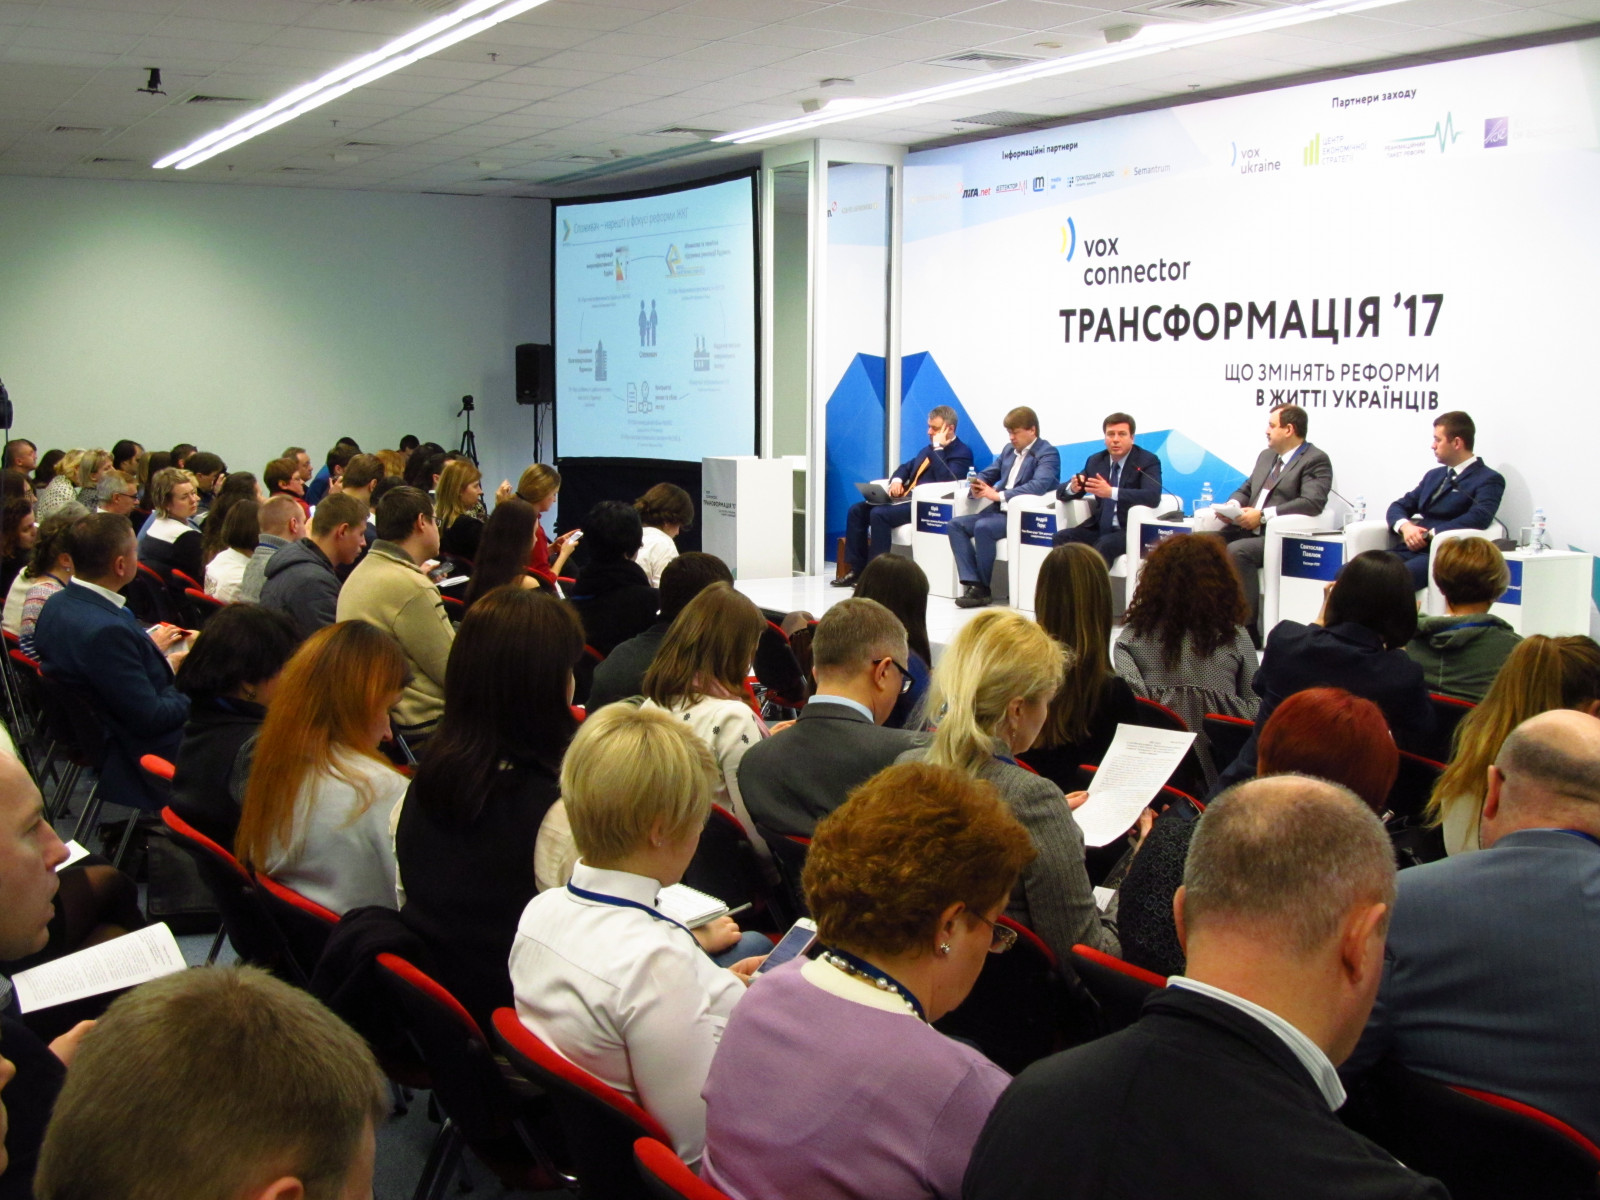 DiXI Group’s Representative Became a Participant of the Conference Hosted by Vox Ukraine